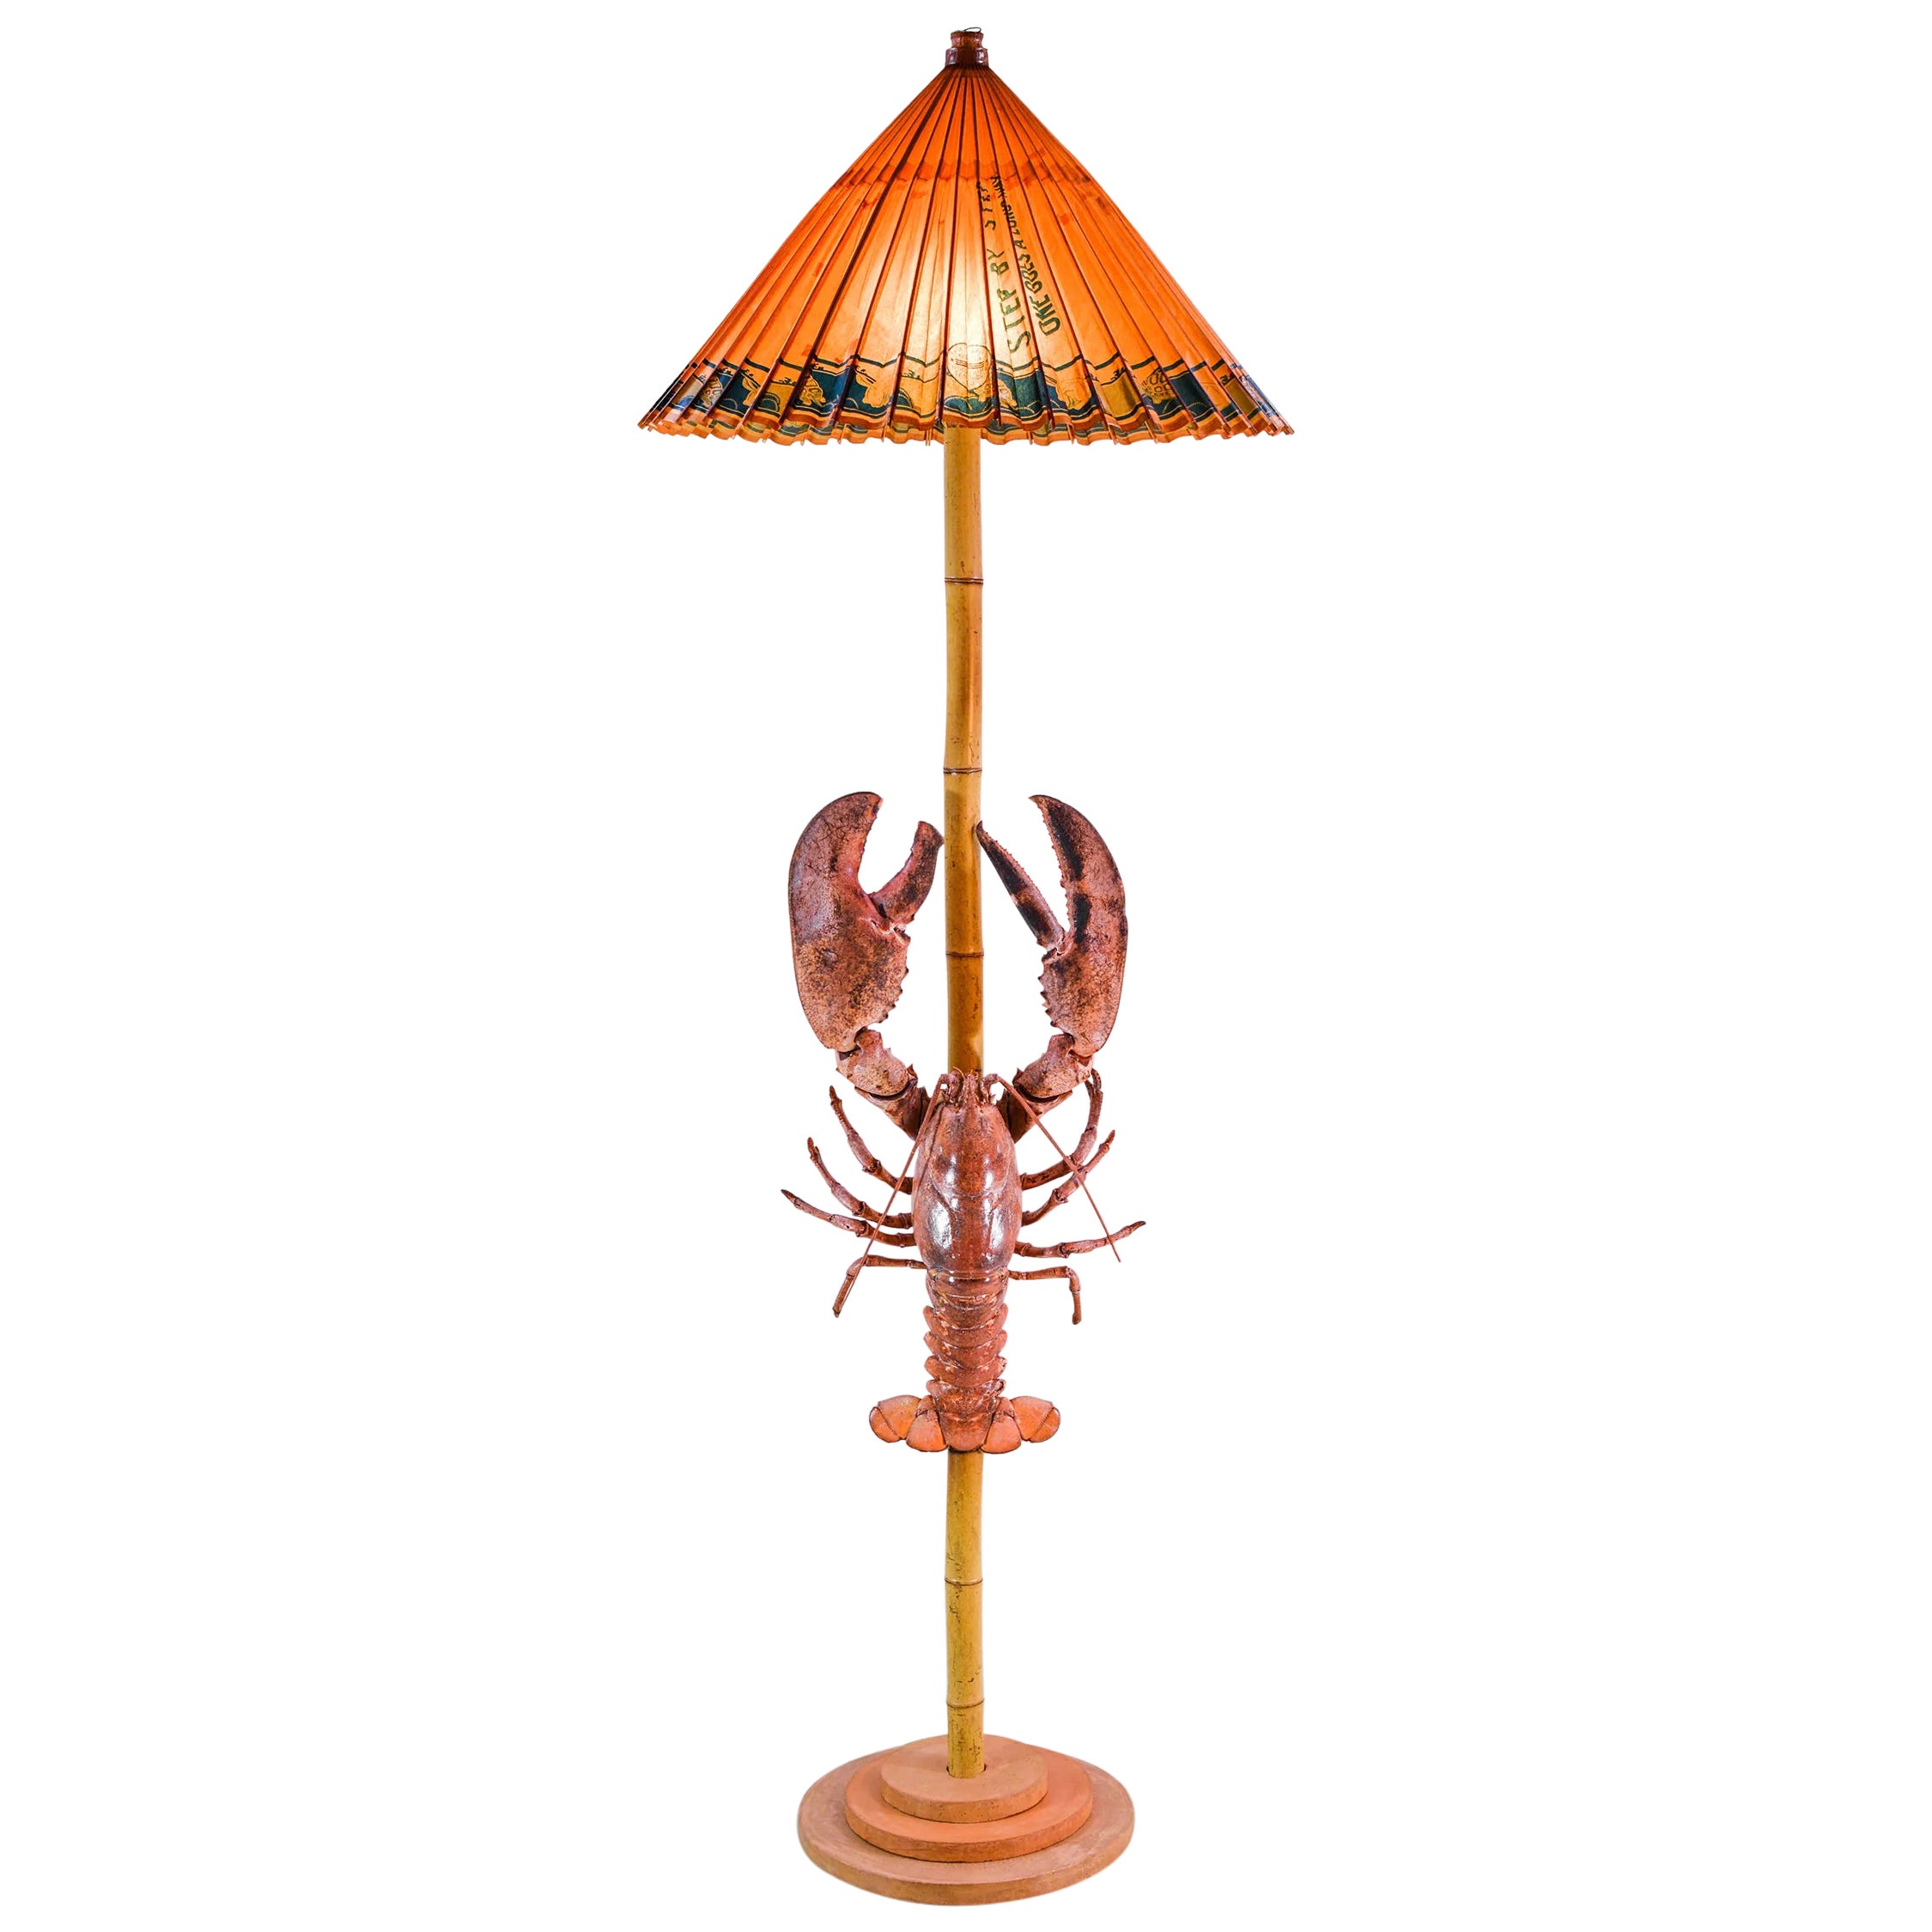 Jumbo Lobster Lamp with Antique Japanese Parasol Shade by Christopher Tennant For Sale